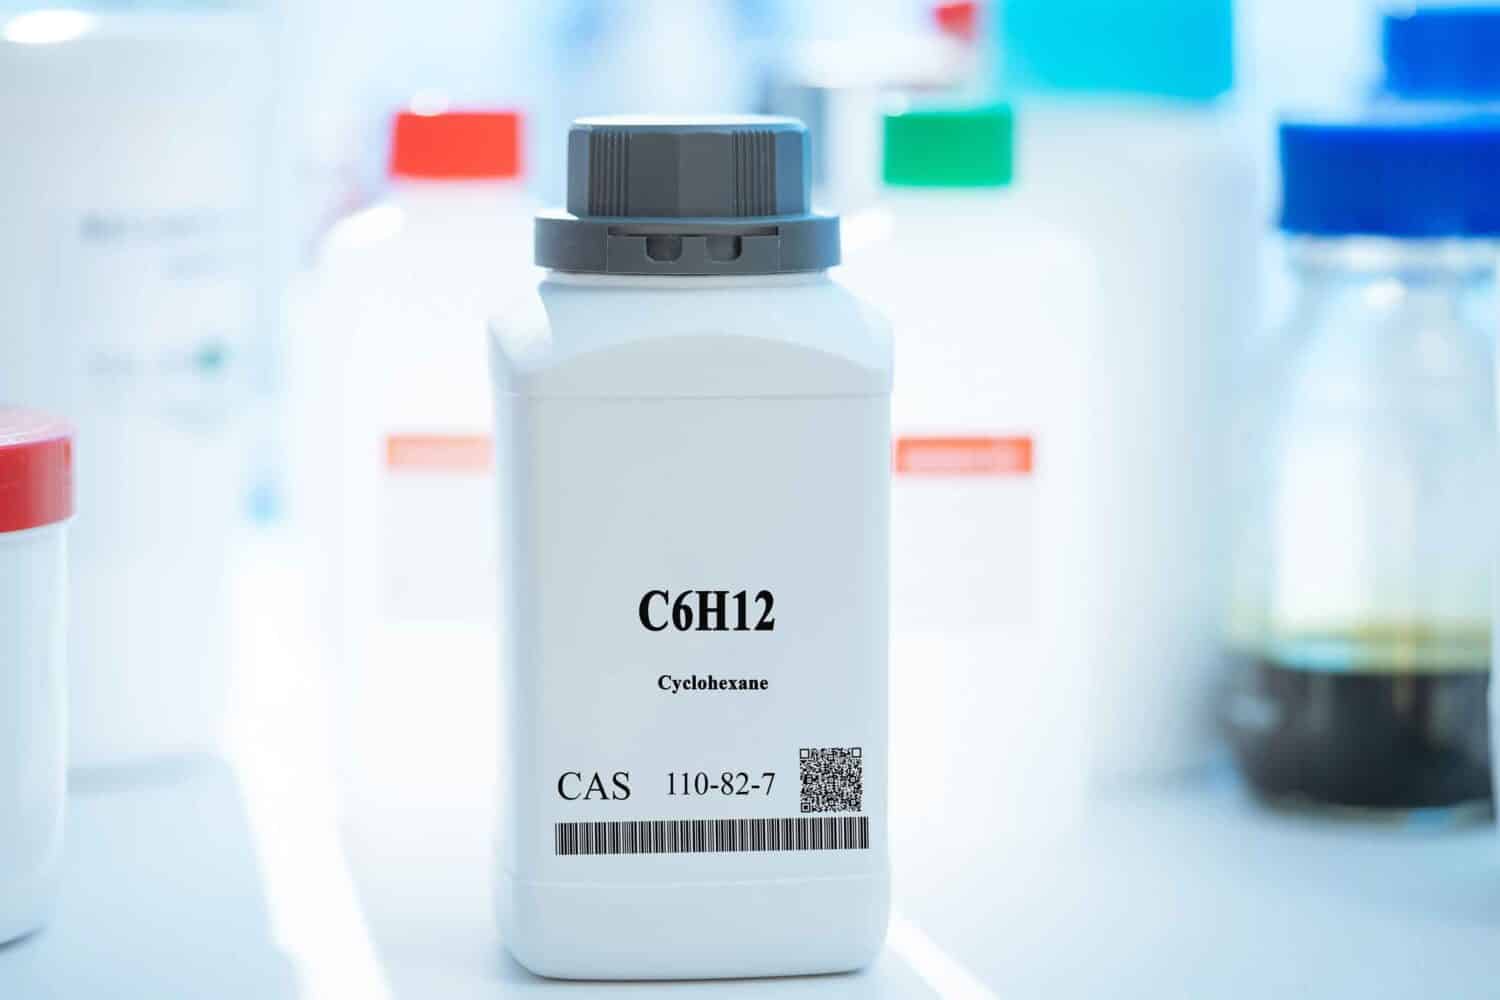 C6H12 cyclohexane CAS 110-82-7 chemical substance in white plastic laboratory packaging